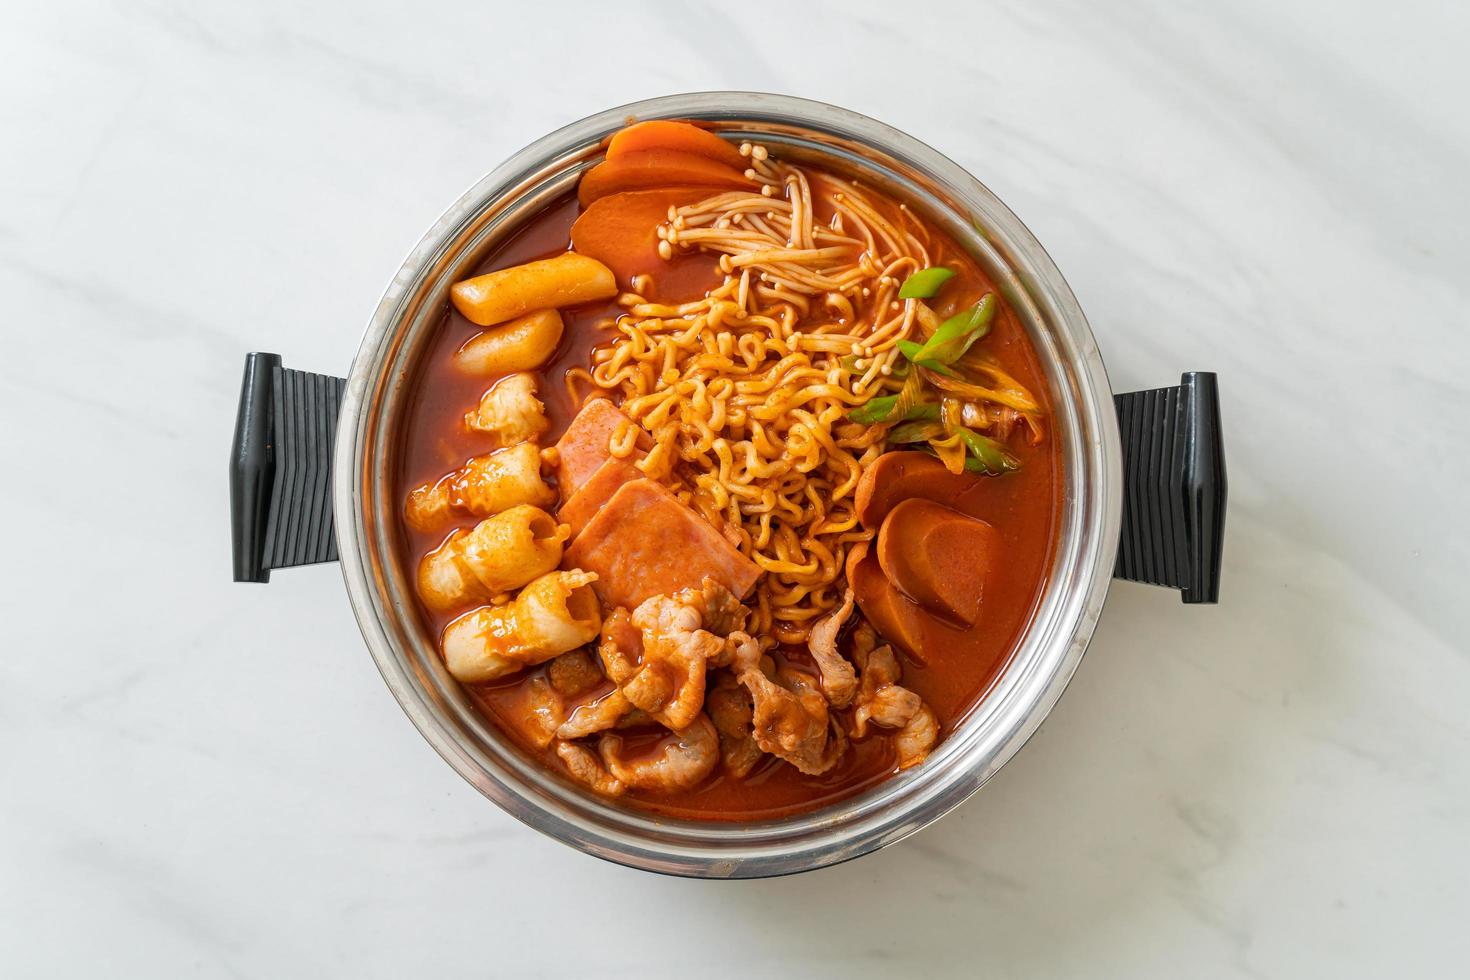 Budae Jjigae or Budaejjigae, Army stew or Army base stew, with kimchi, spam, sausages, ramen noodles, and more - popular Korean hot pot food style photo